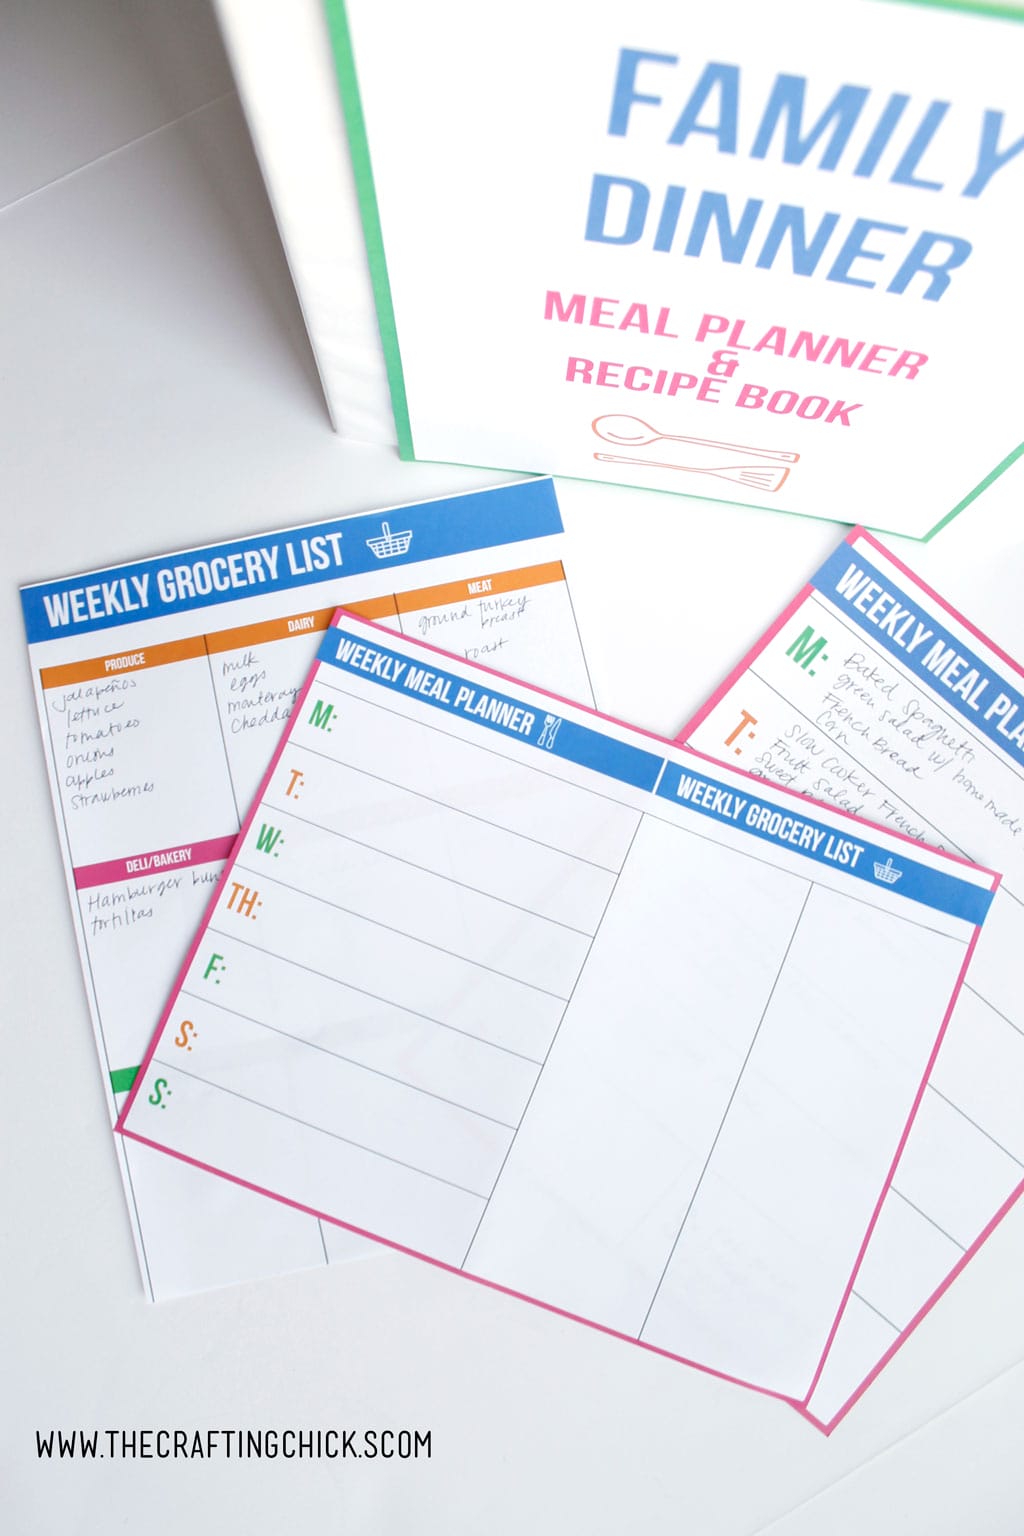 Meal Planning 101! We've got tips and ideas that will take your dinner time from stressful to done. Free printables included.